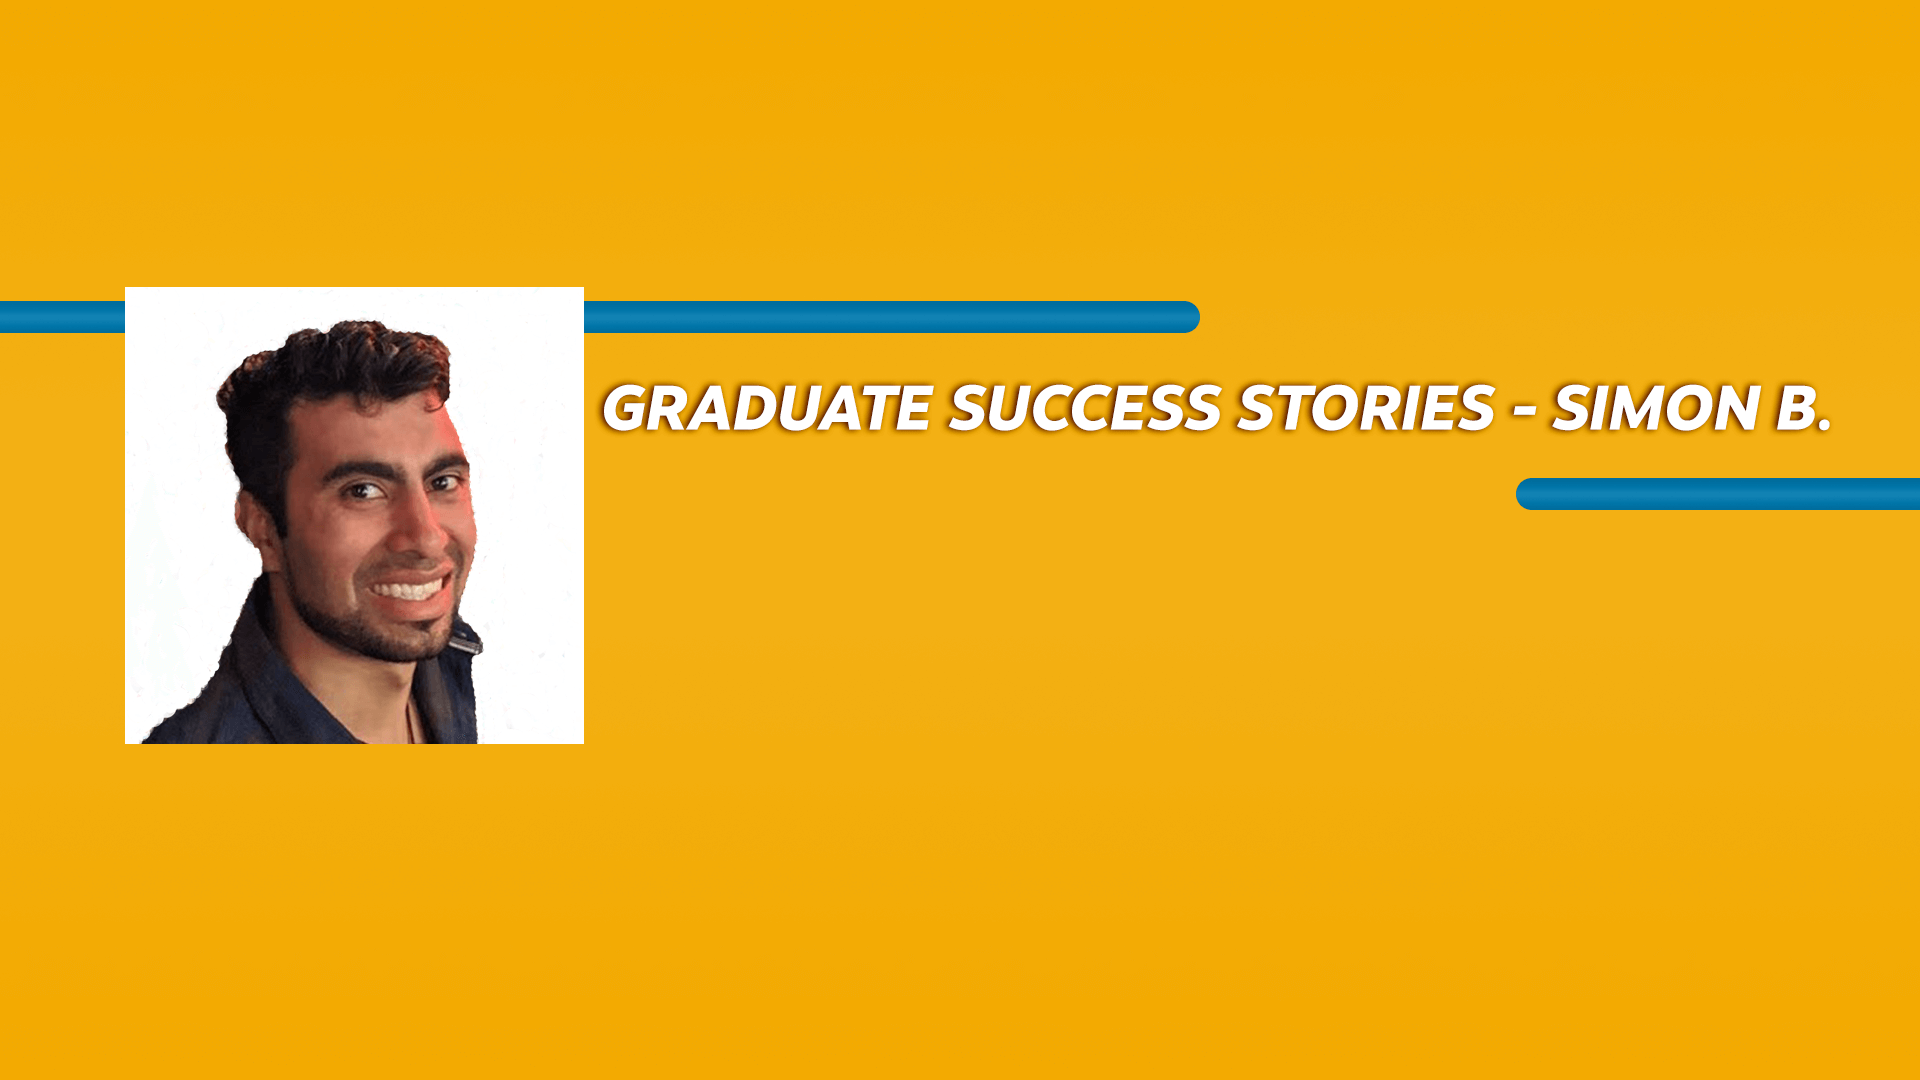 Orange rectangle with a picture of a man wearing a shirt and Graduate Success Stories - Simon B. text in white font